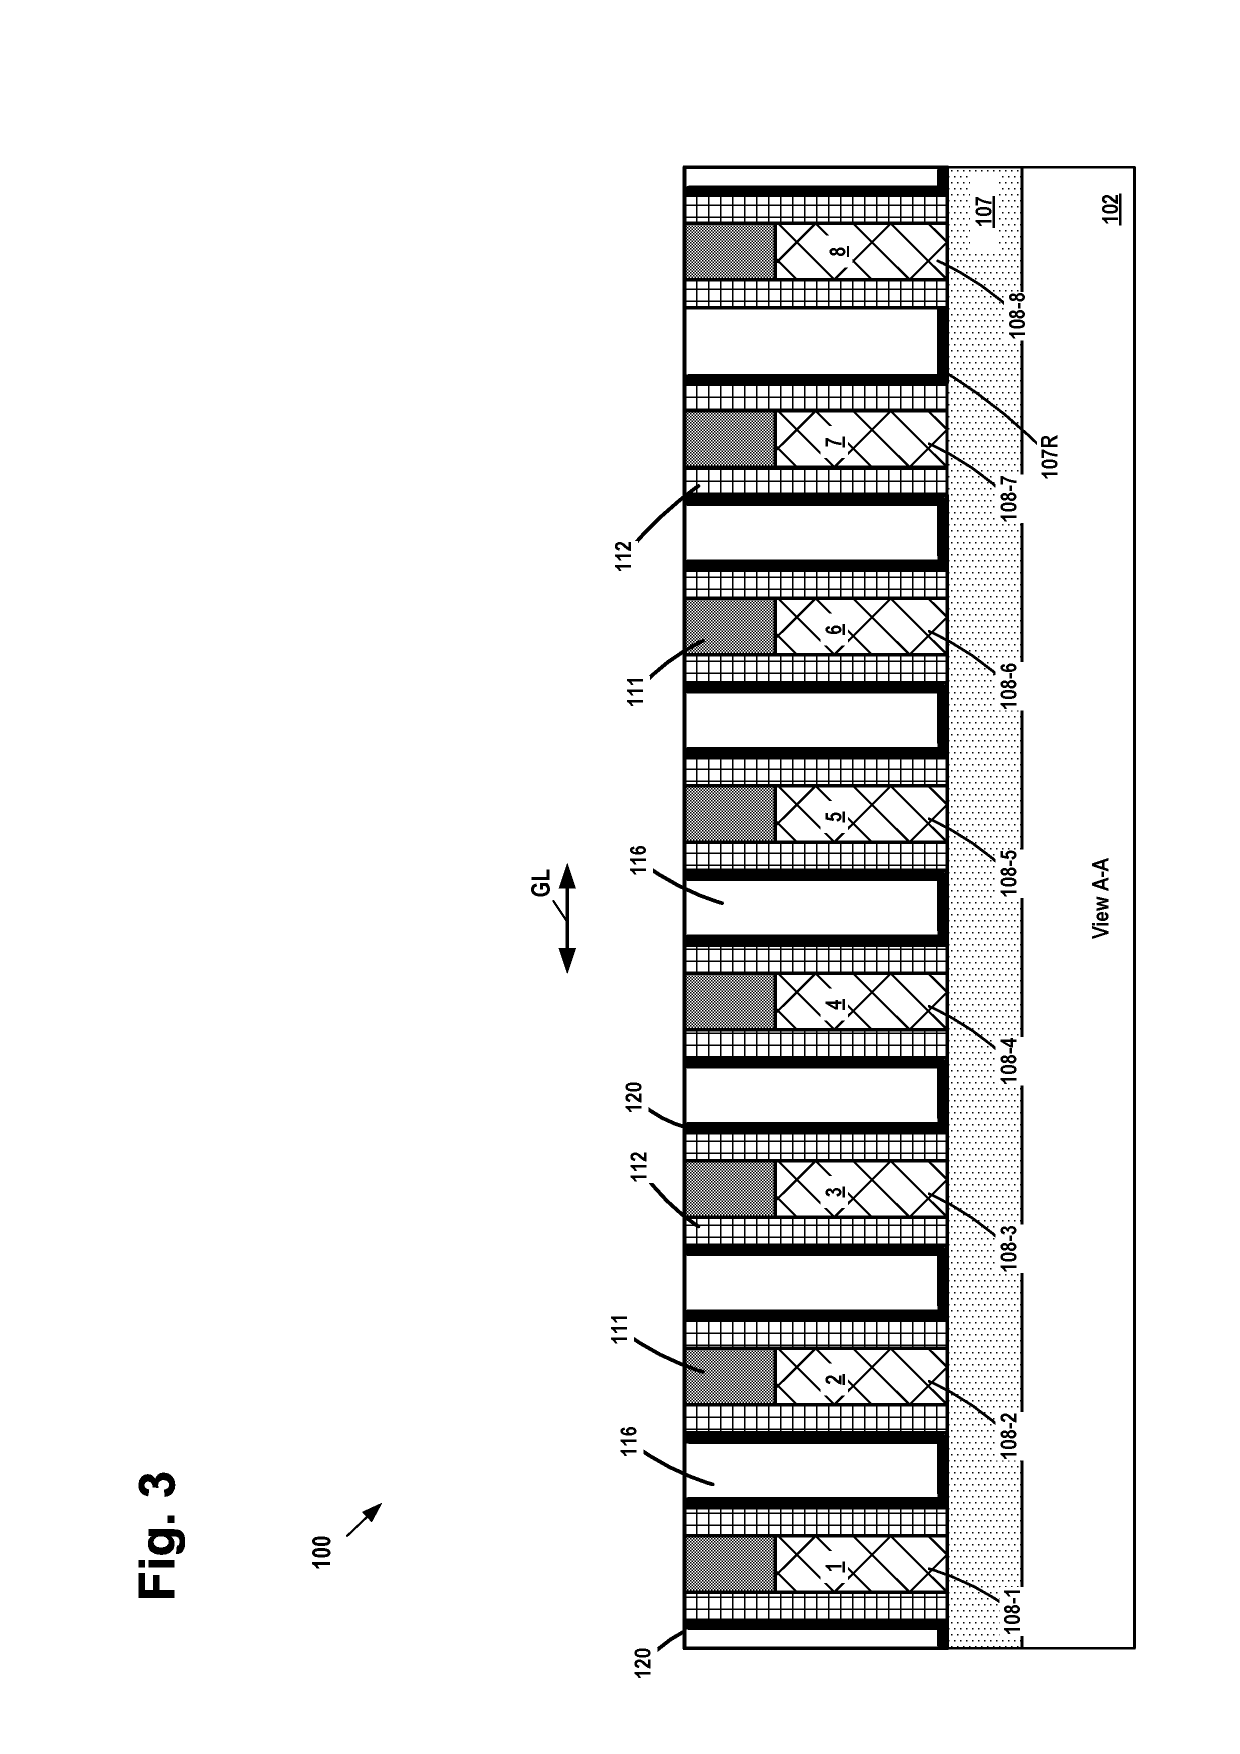 Methods of forming source/drain contact structures on integrated circuit products